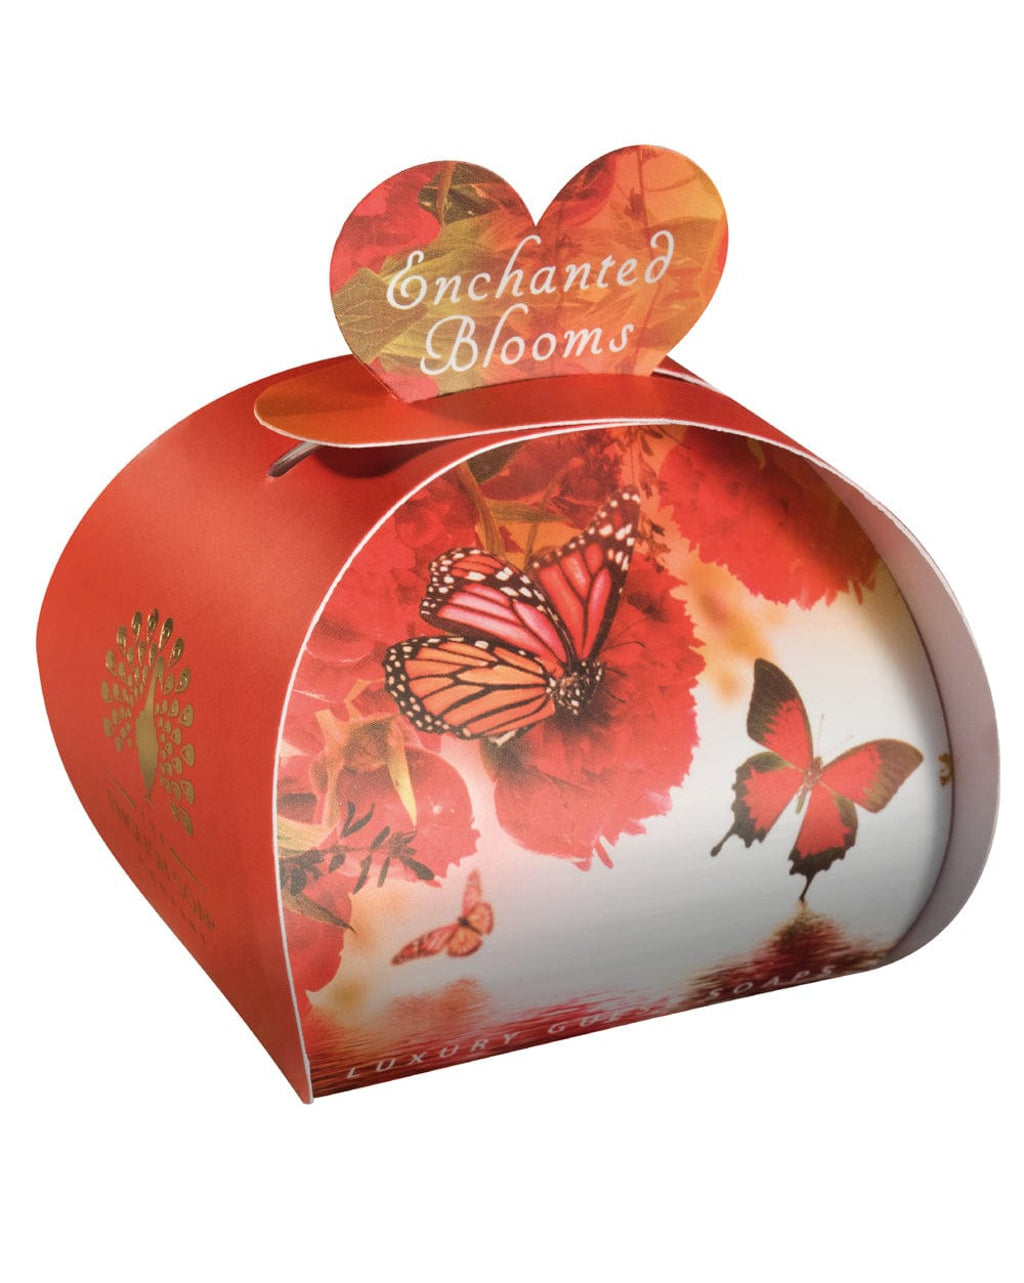 Enchanted Blooms Guest Soaps (3 x 20g) from our Luxury Bar Soap collection by The English Soap Company